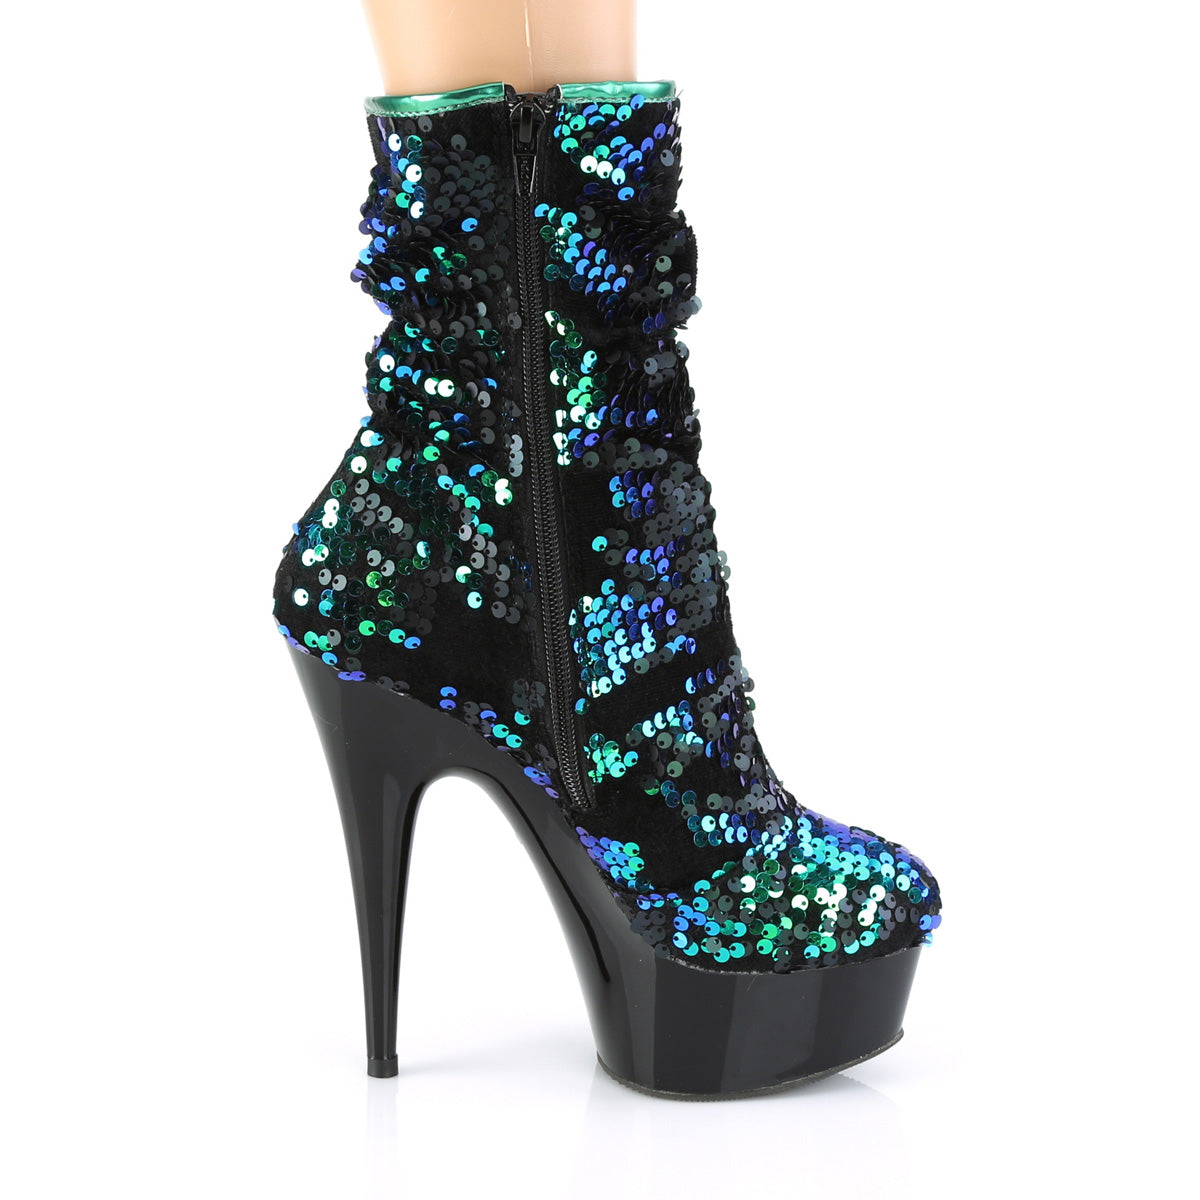 Pleaser Womens Ankle Boots DELIGHT-1004 Green Iridescent Sequins/Blk